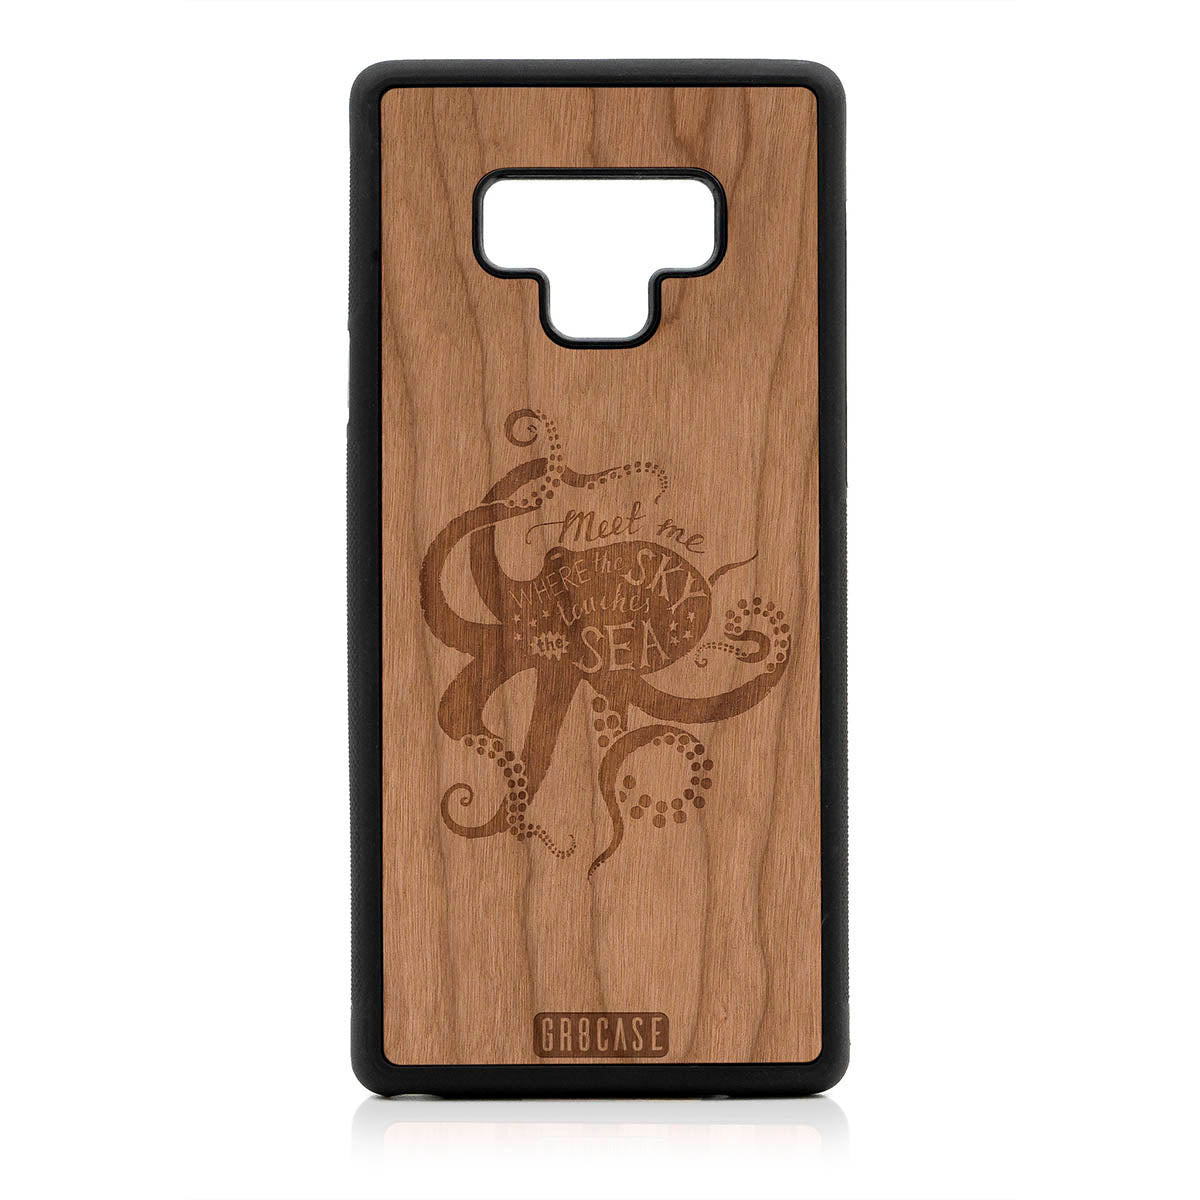 Meet Me Where The Sky Touches The Sea (Octopus) Design Wood Case For Samsung Galaxy Note 9